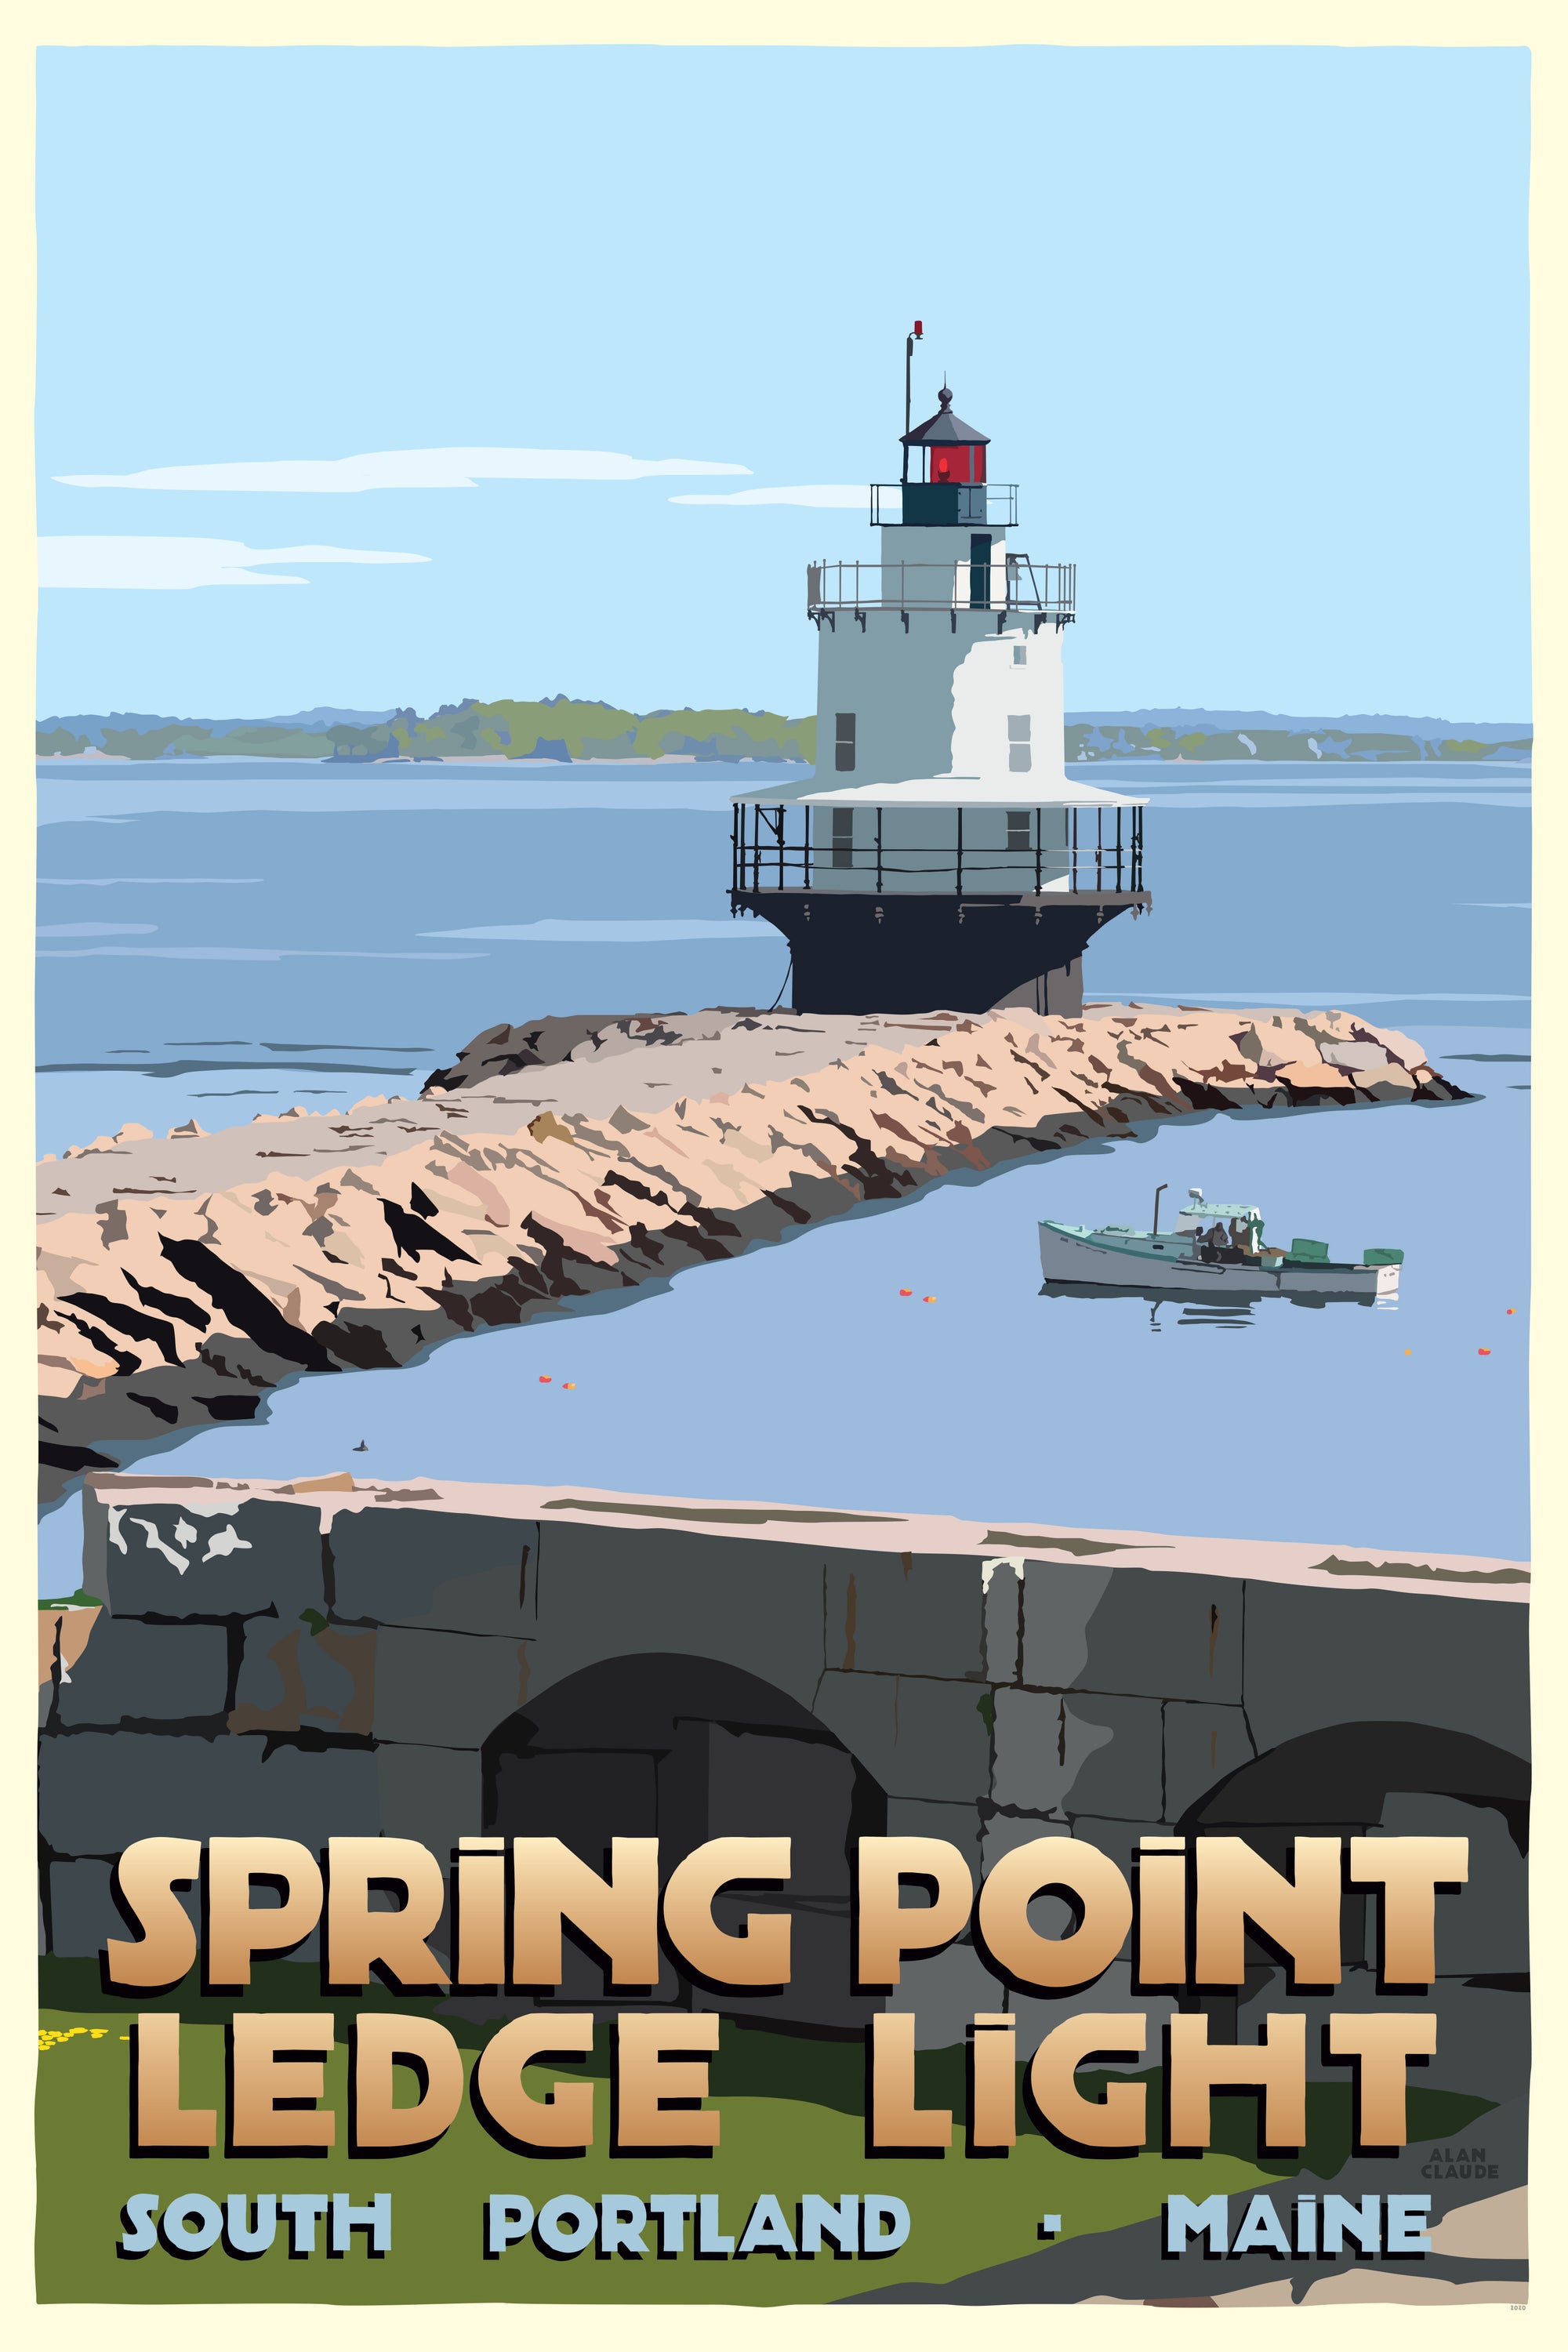 Spring Point Ledge Light Art Print 36" x 53" Travel Poster By Alan Claude - Maine